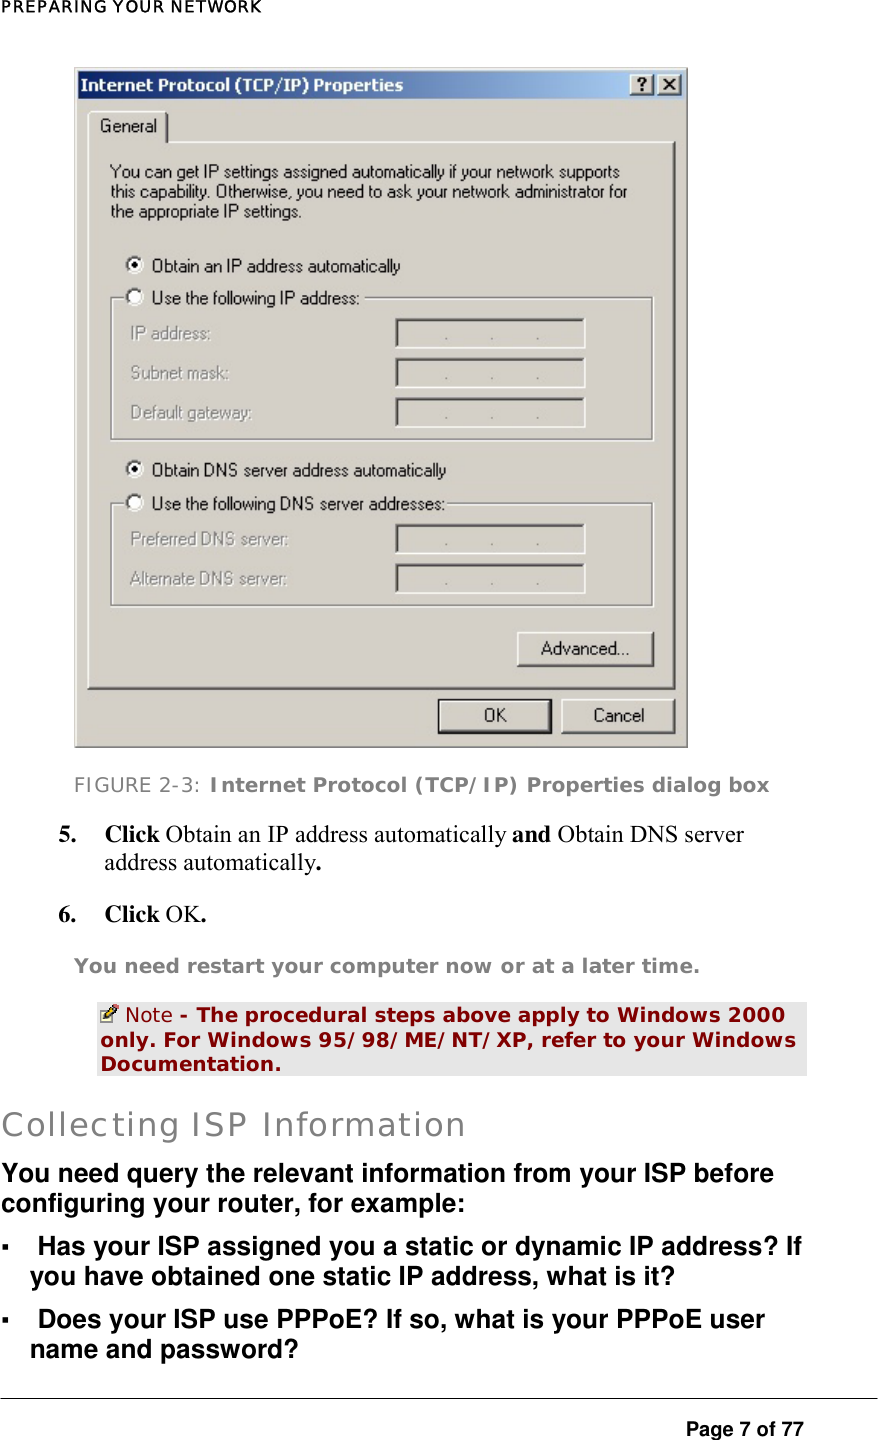 PREPARING YOUR NETWORK  Page 7 of 77  FIGURE 2-3: Internet Protocol (TCP/IP) Properties dialog box 5. Click Obtain an IP address automatically and Obtain DNS server address automatically.  6. Click OK.  You need restart your computer now or at a later time.   Note - The procedural steps above apply to Windows 2000 only. For Windows 95/98/ME/NT/XP, refer to your Windows Documentation.  Collecting ISP Information You need query the relevant information from your ISP before configuring your router, for example:  ▪ Has your ISP assigned you a static or dynamic IP address? If you have obtained one static IP address, what is it?  ▪ Does your ISP use PPPoE? If so, what is your PPPoE user name and password?  